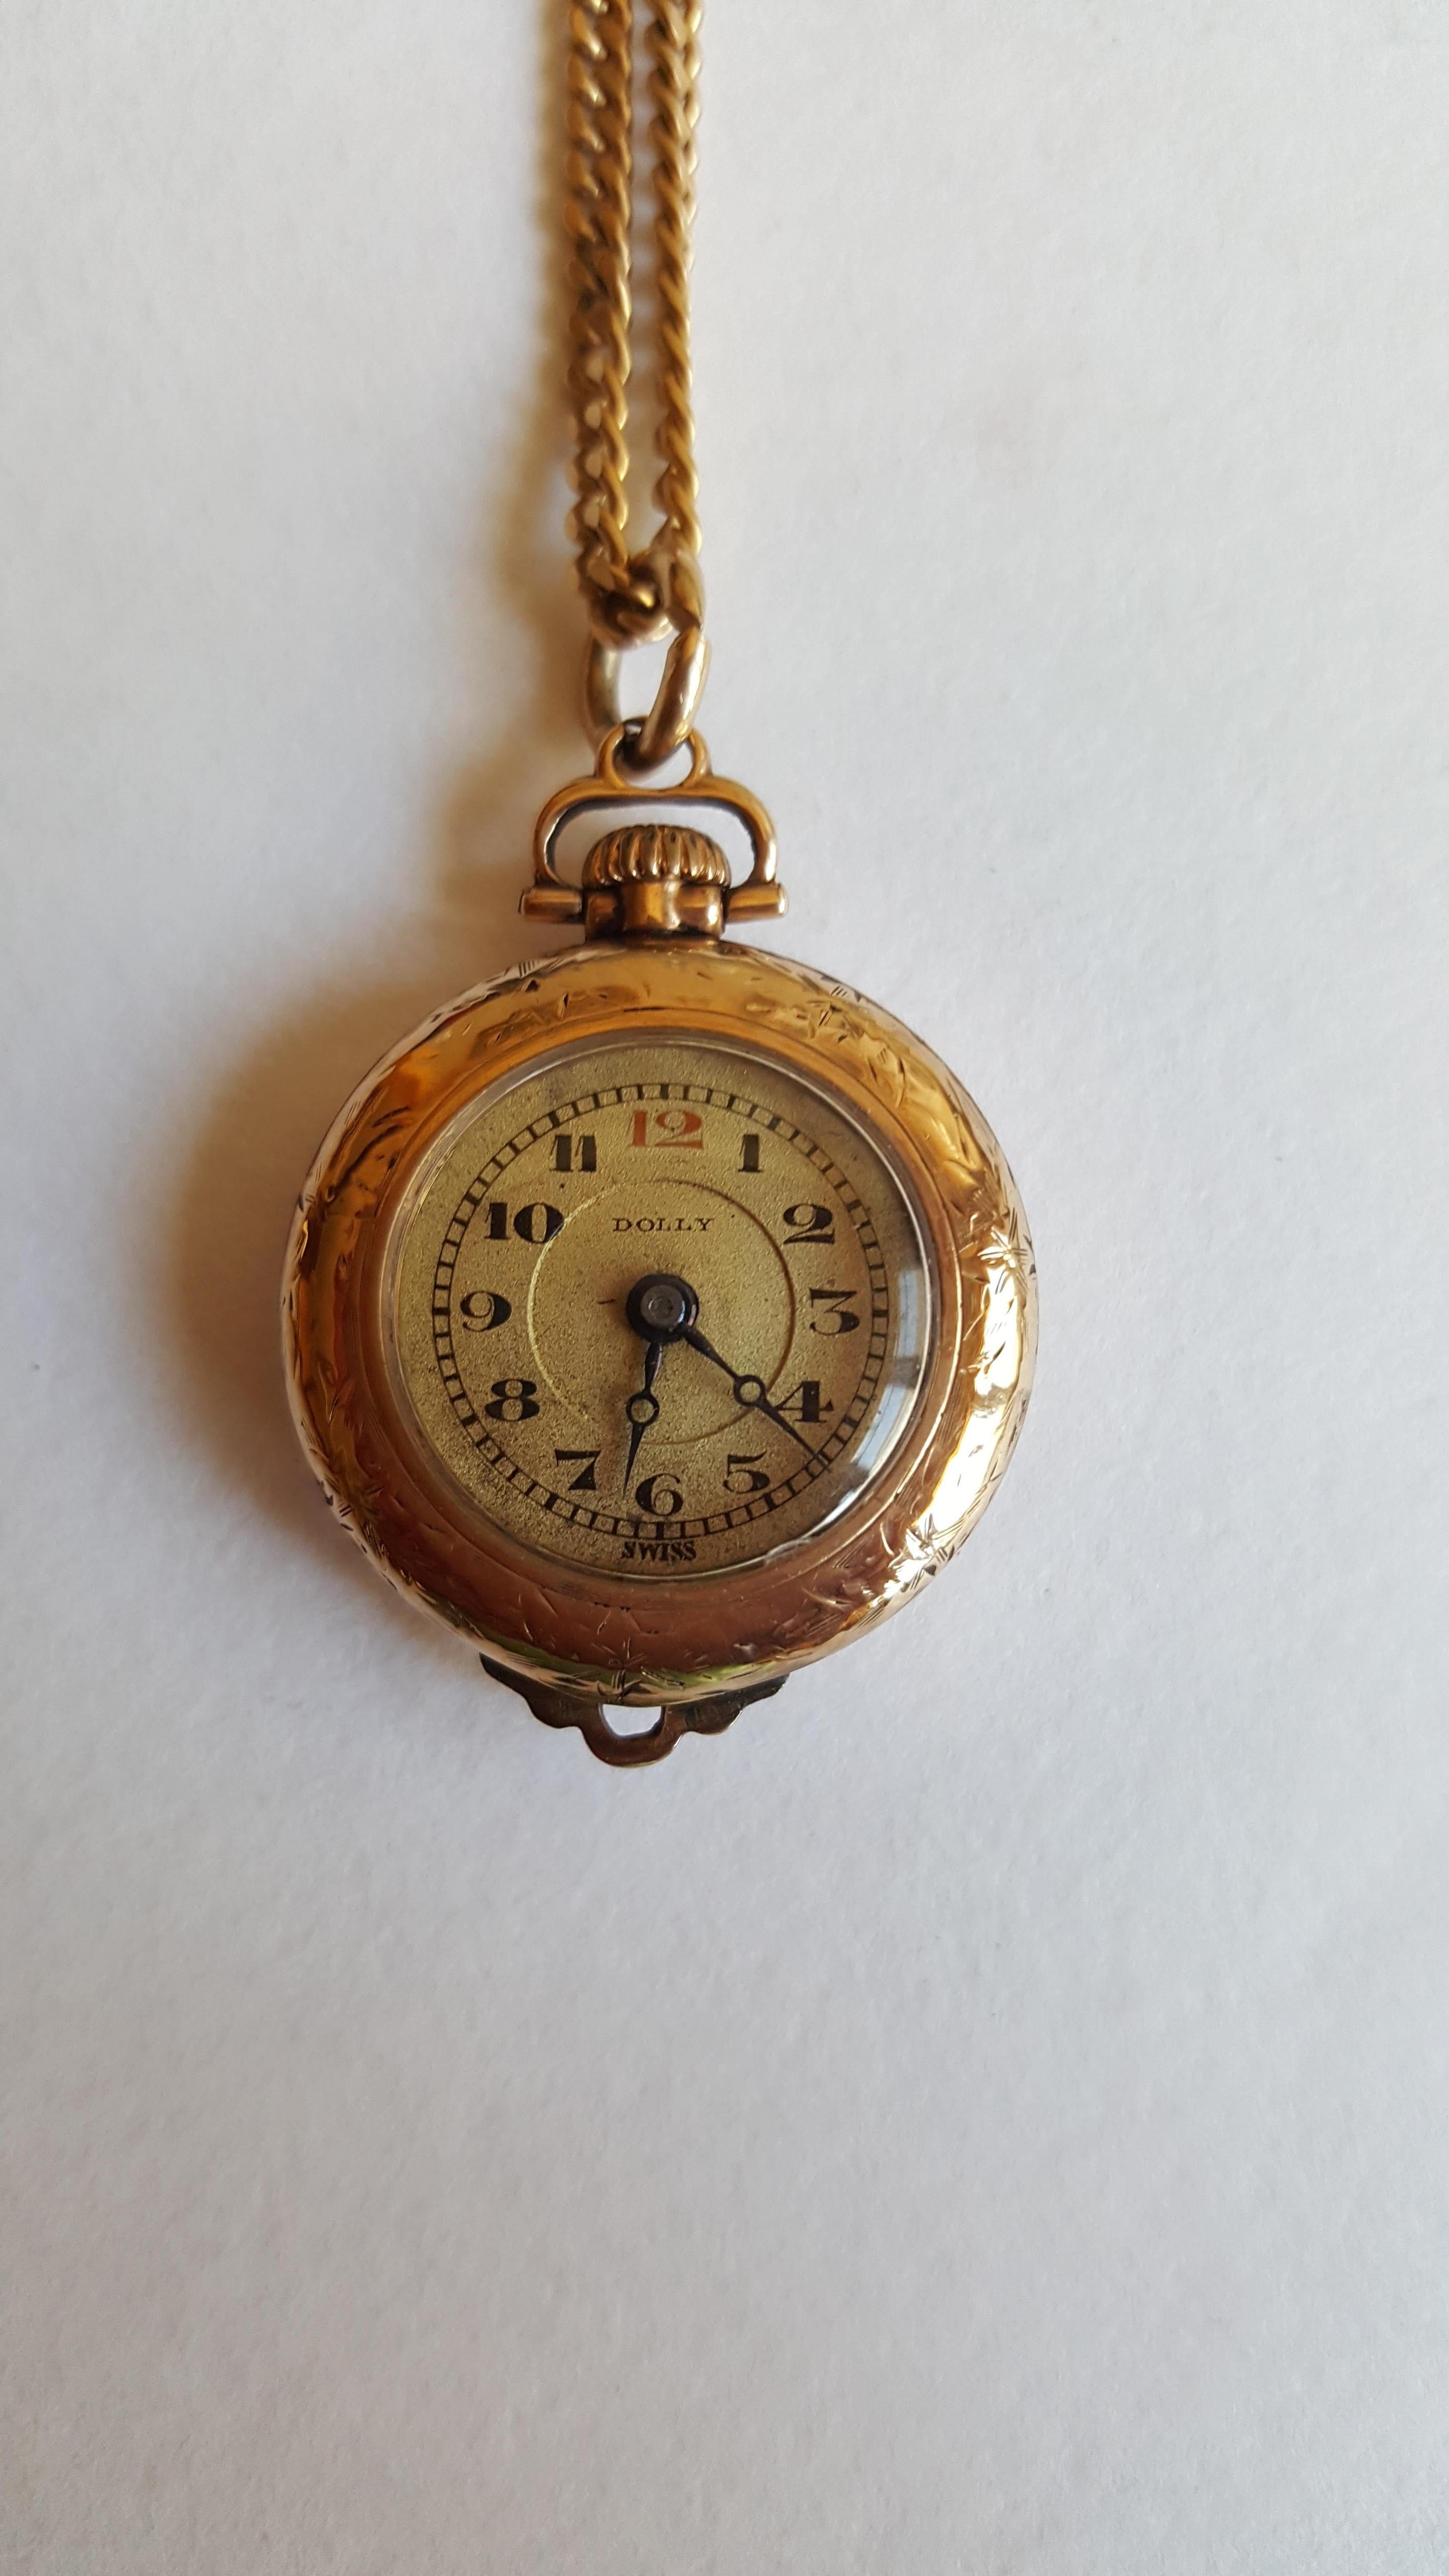 Vintage Gold Plated Pendant Watch, Dolly Brand, Working, 15 Jewel, 2 Adjusted, Swiss Made, Ariston  Watch Co. Produced by Illinois Watch Co. 
Beautiful vintage from the 1920's,  24 mm in diameter, the size of a quarter.  18 in chain. 9 mm thick. 